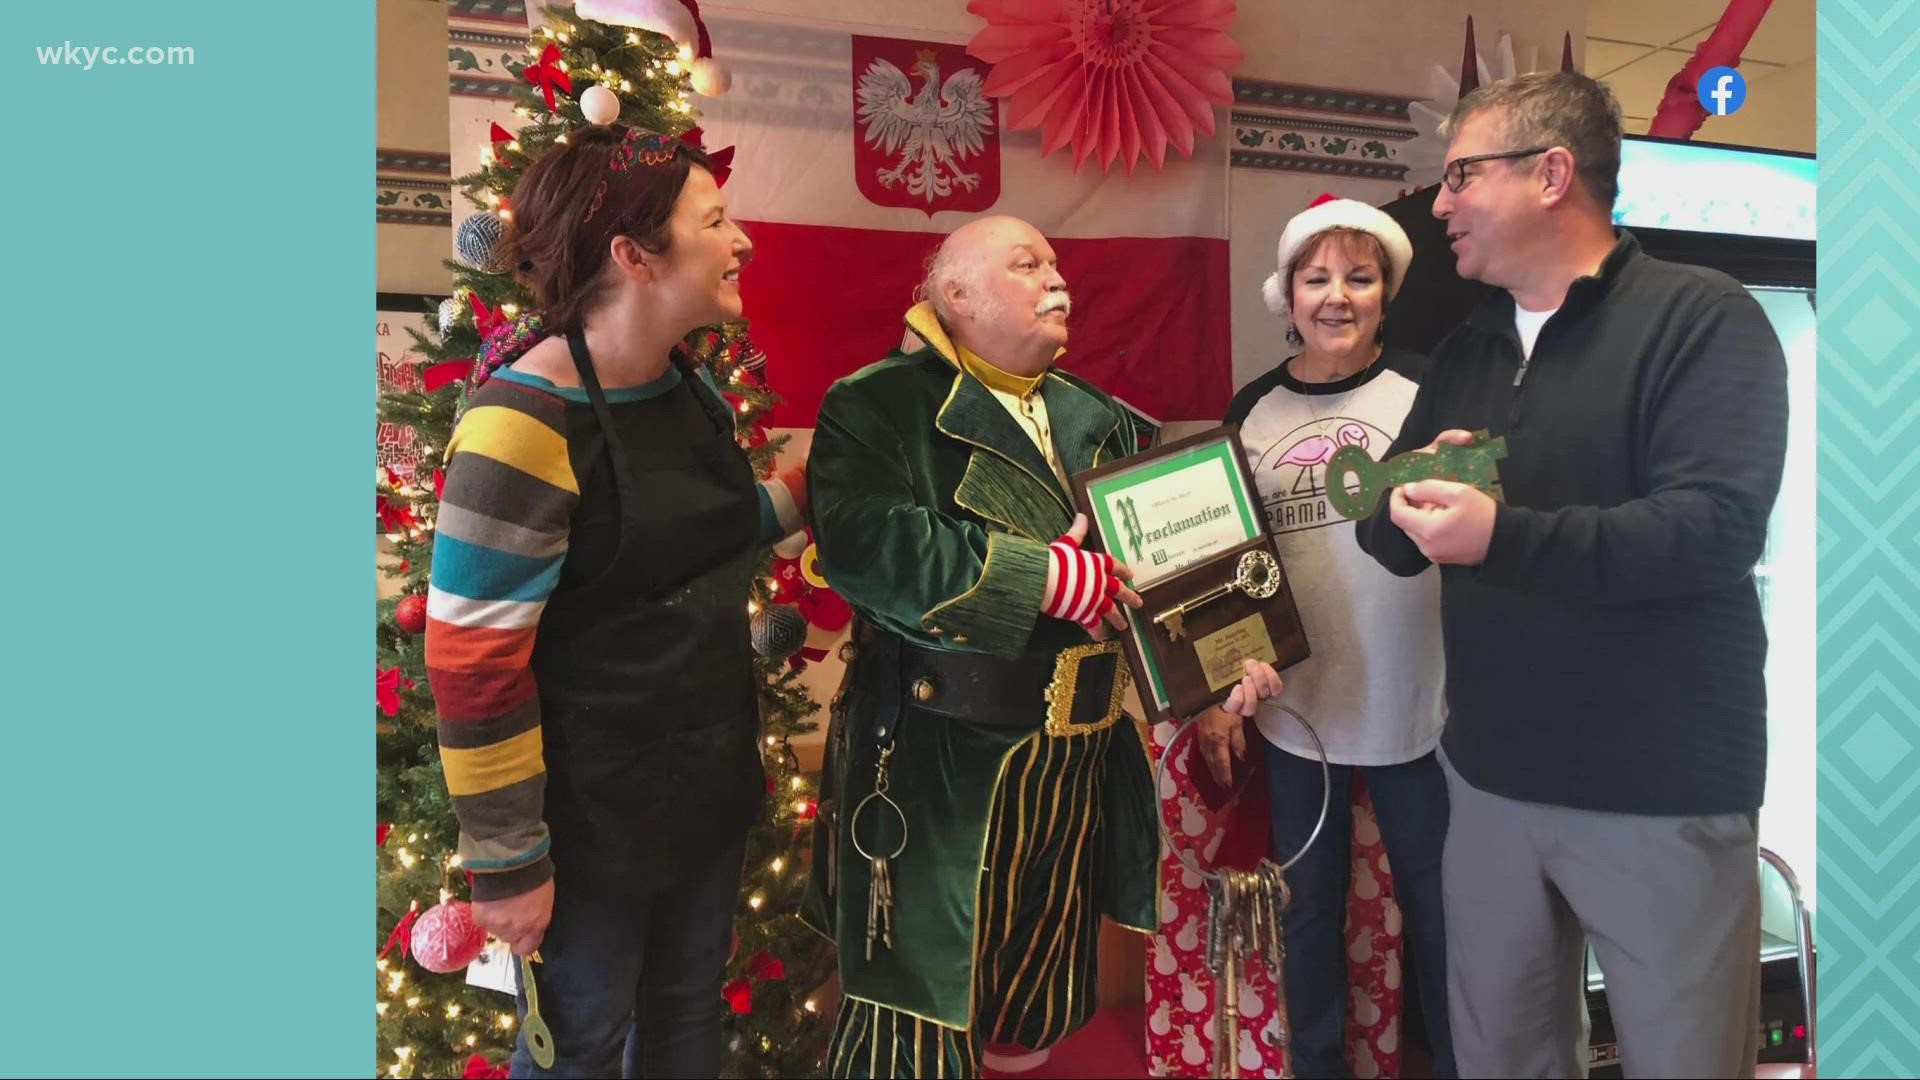 It was a special day for Mr. Jingeling as the iconic Christmas character was honored with a key to the city of Parma on Saturday.